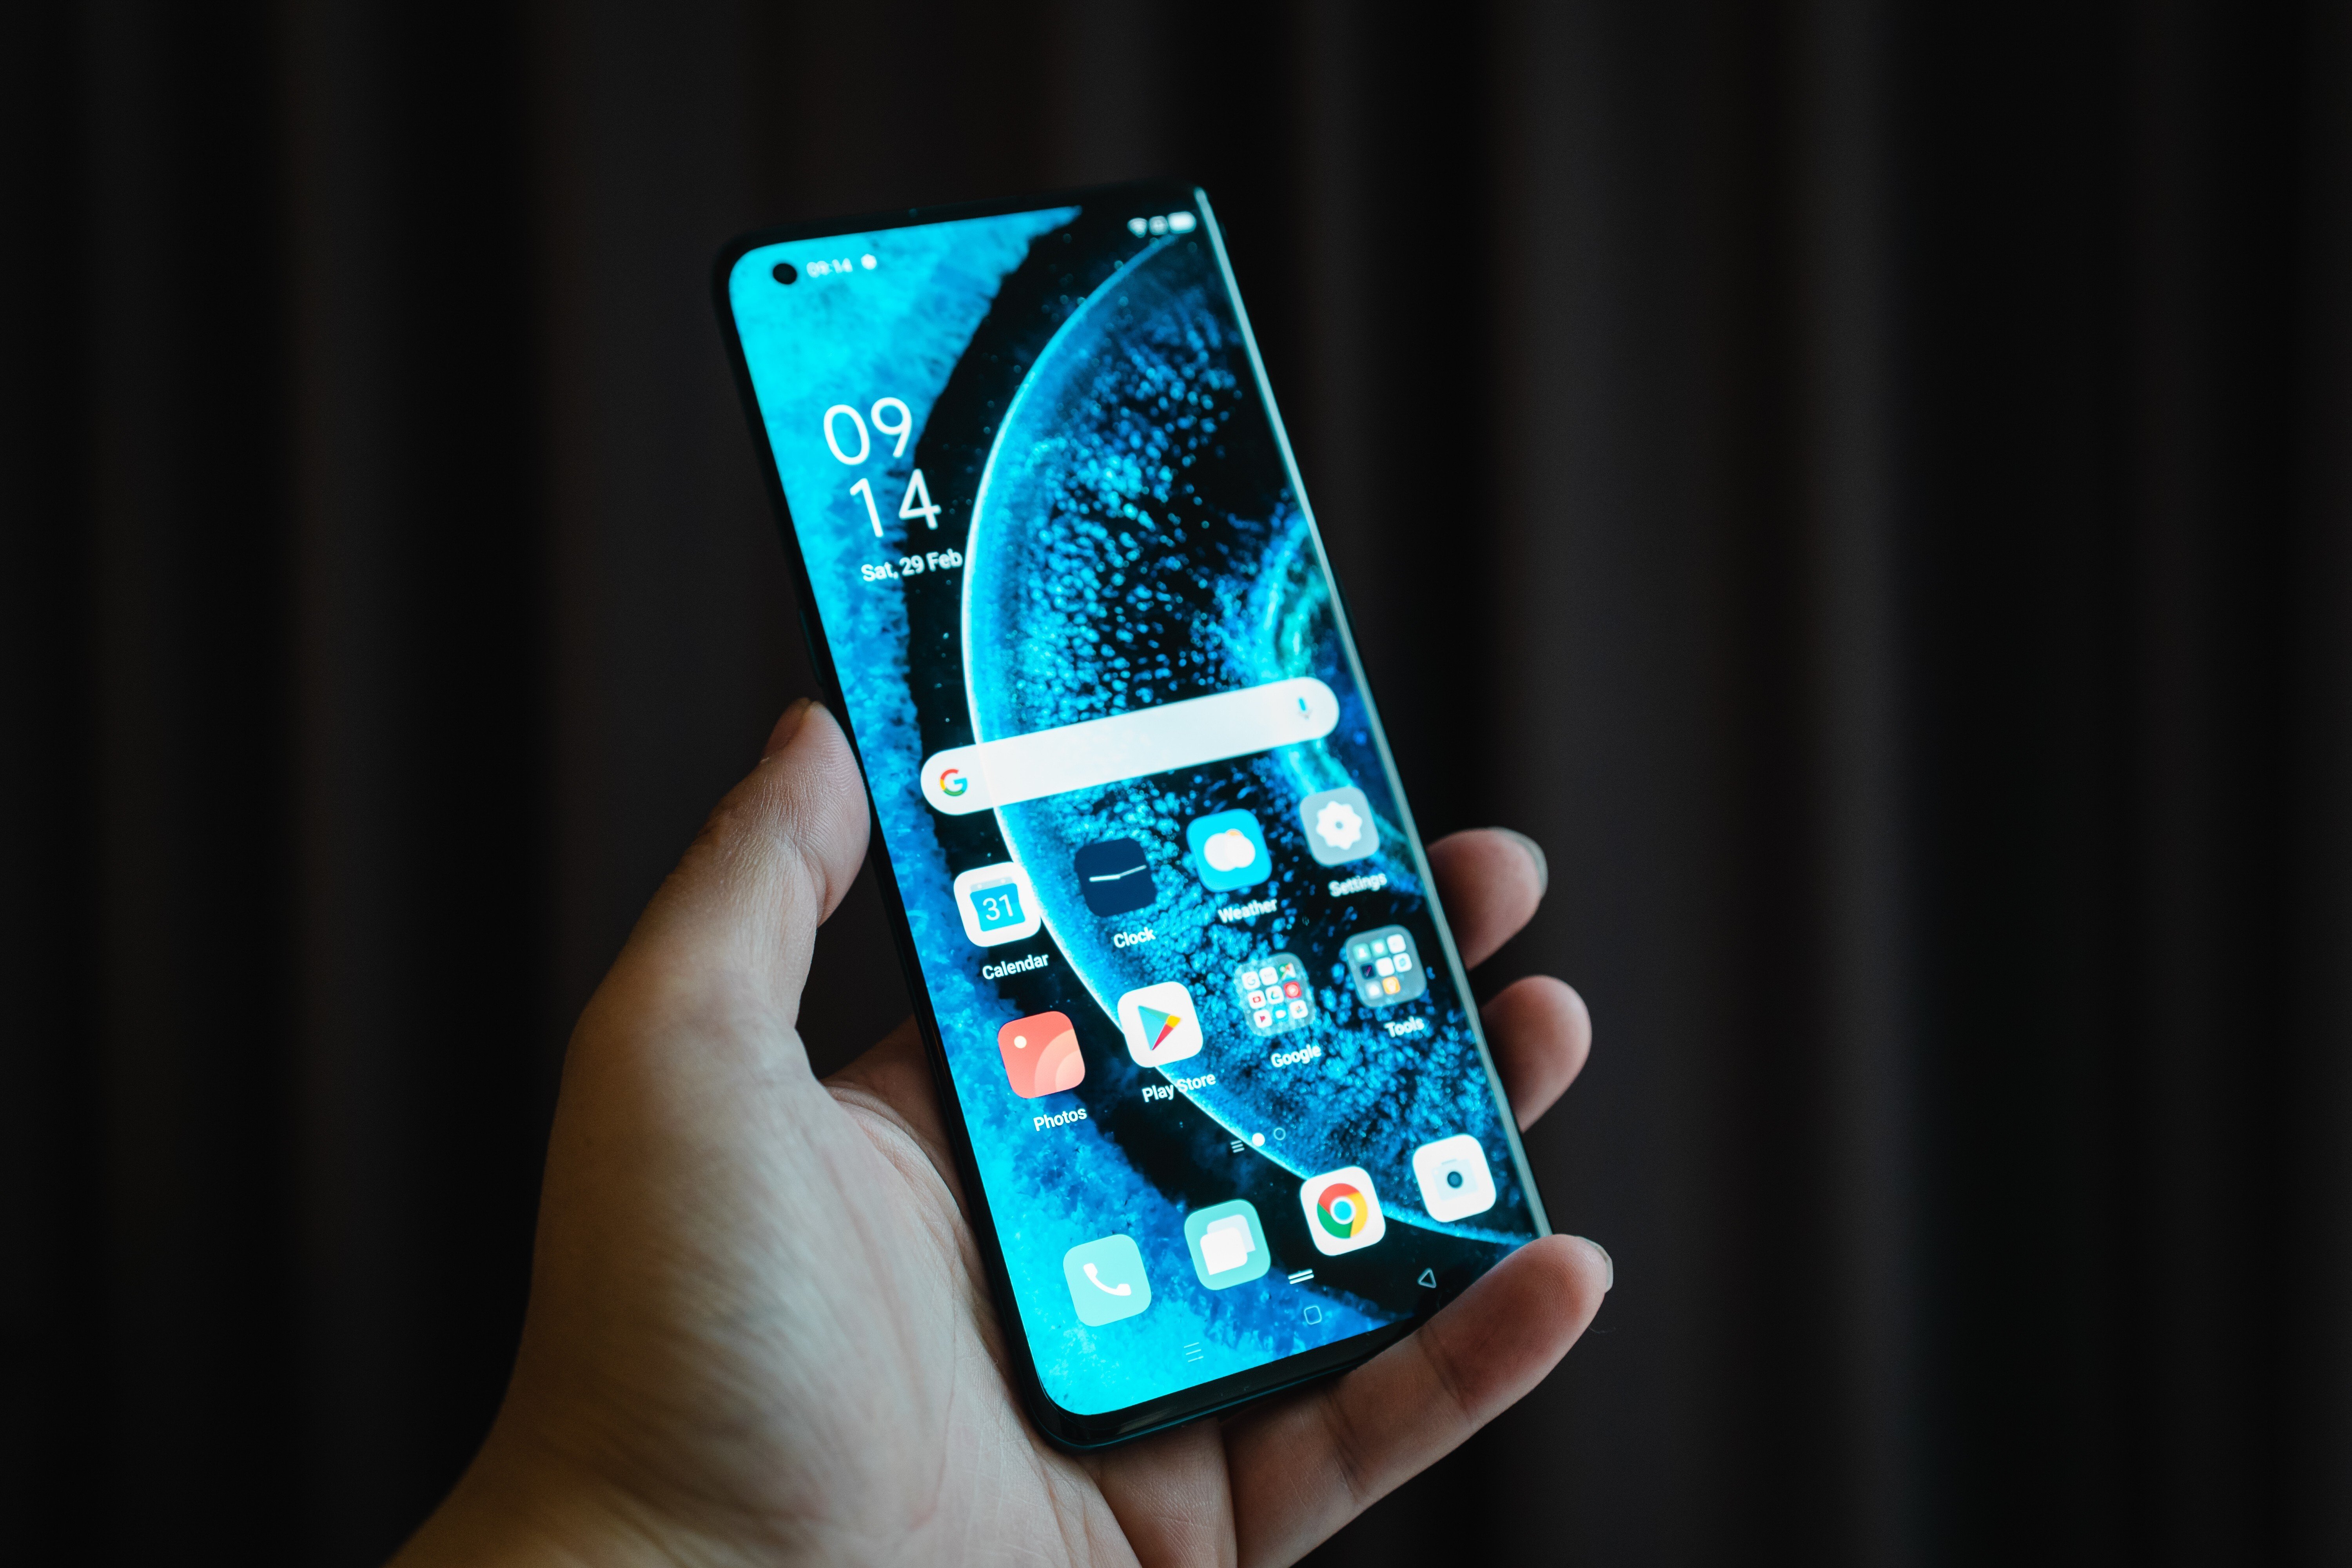 Oppo's new flagship 5G Android smartphone, the Find X2 Pro, will provide integrated online services developed by the company. Photo: DPA